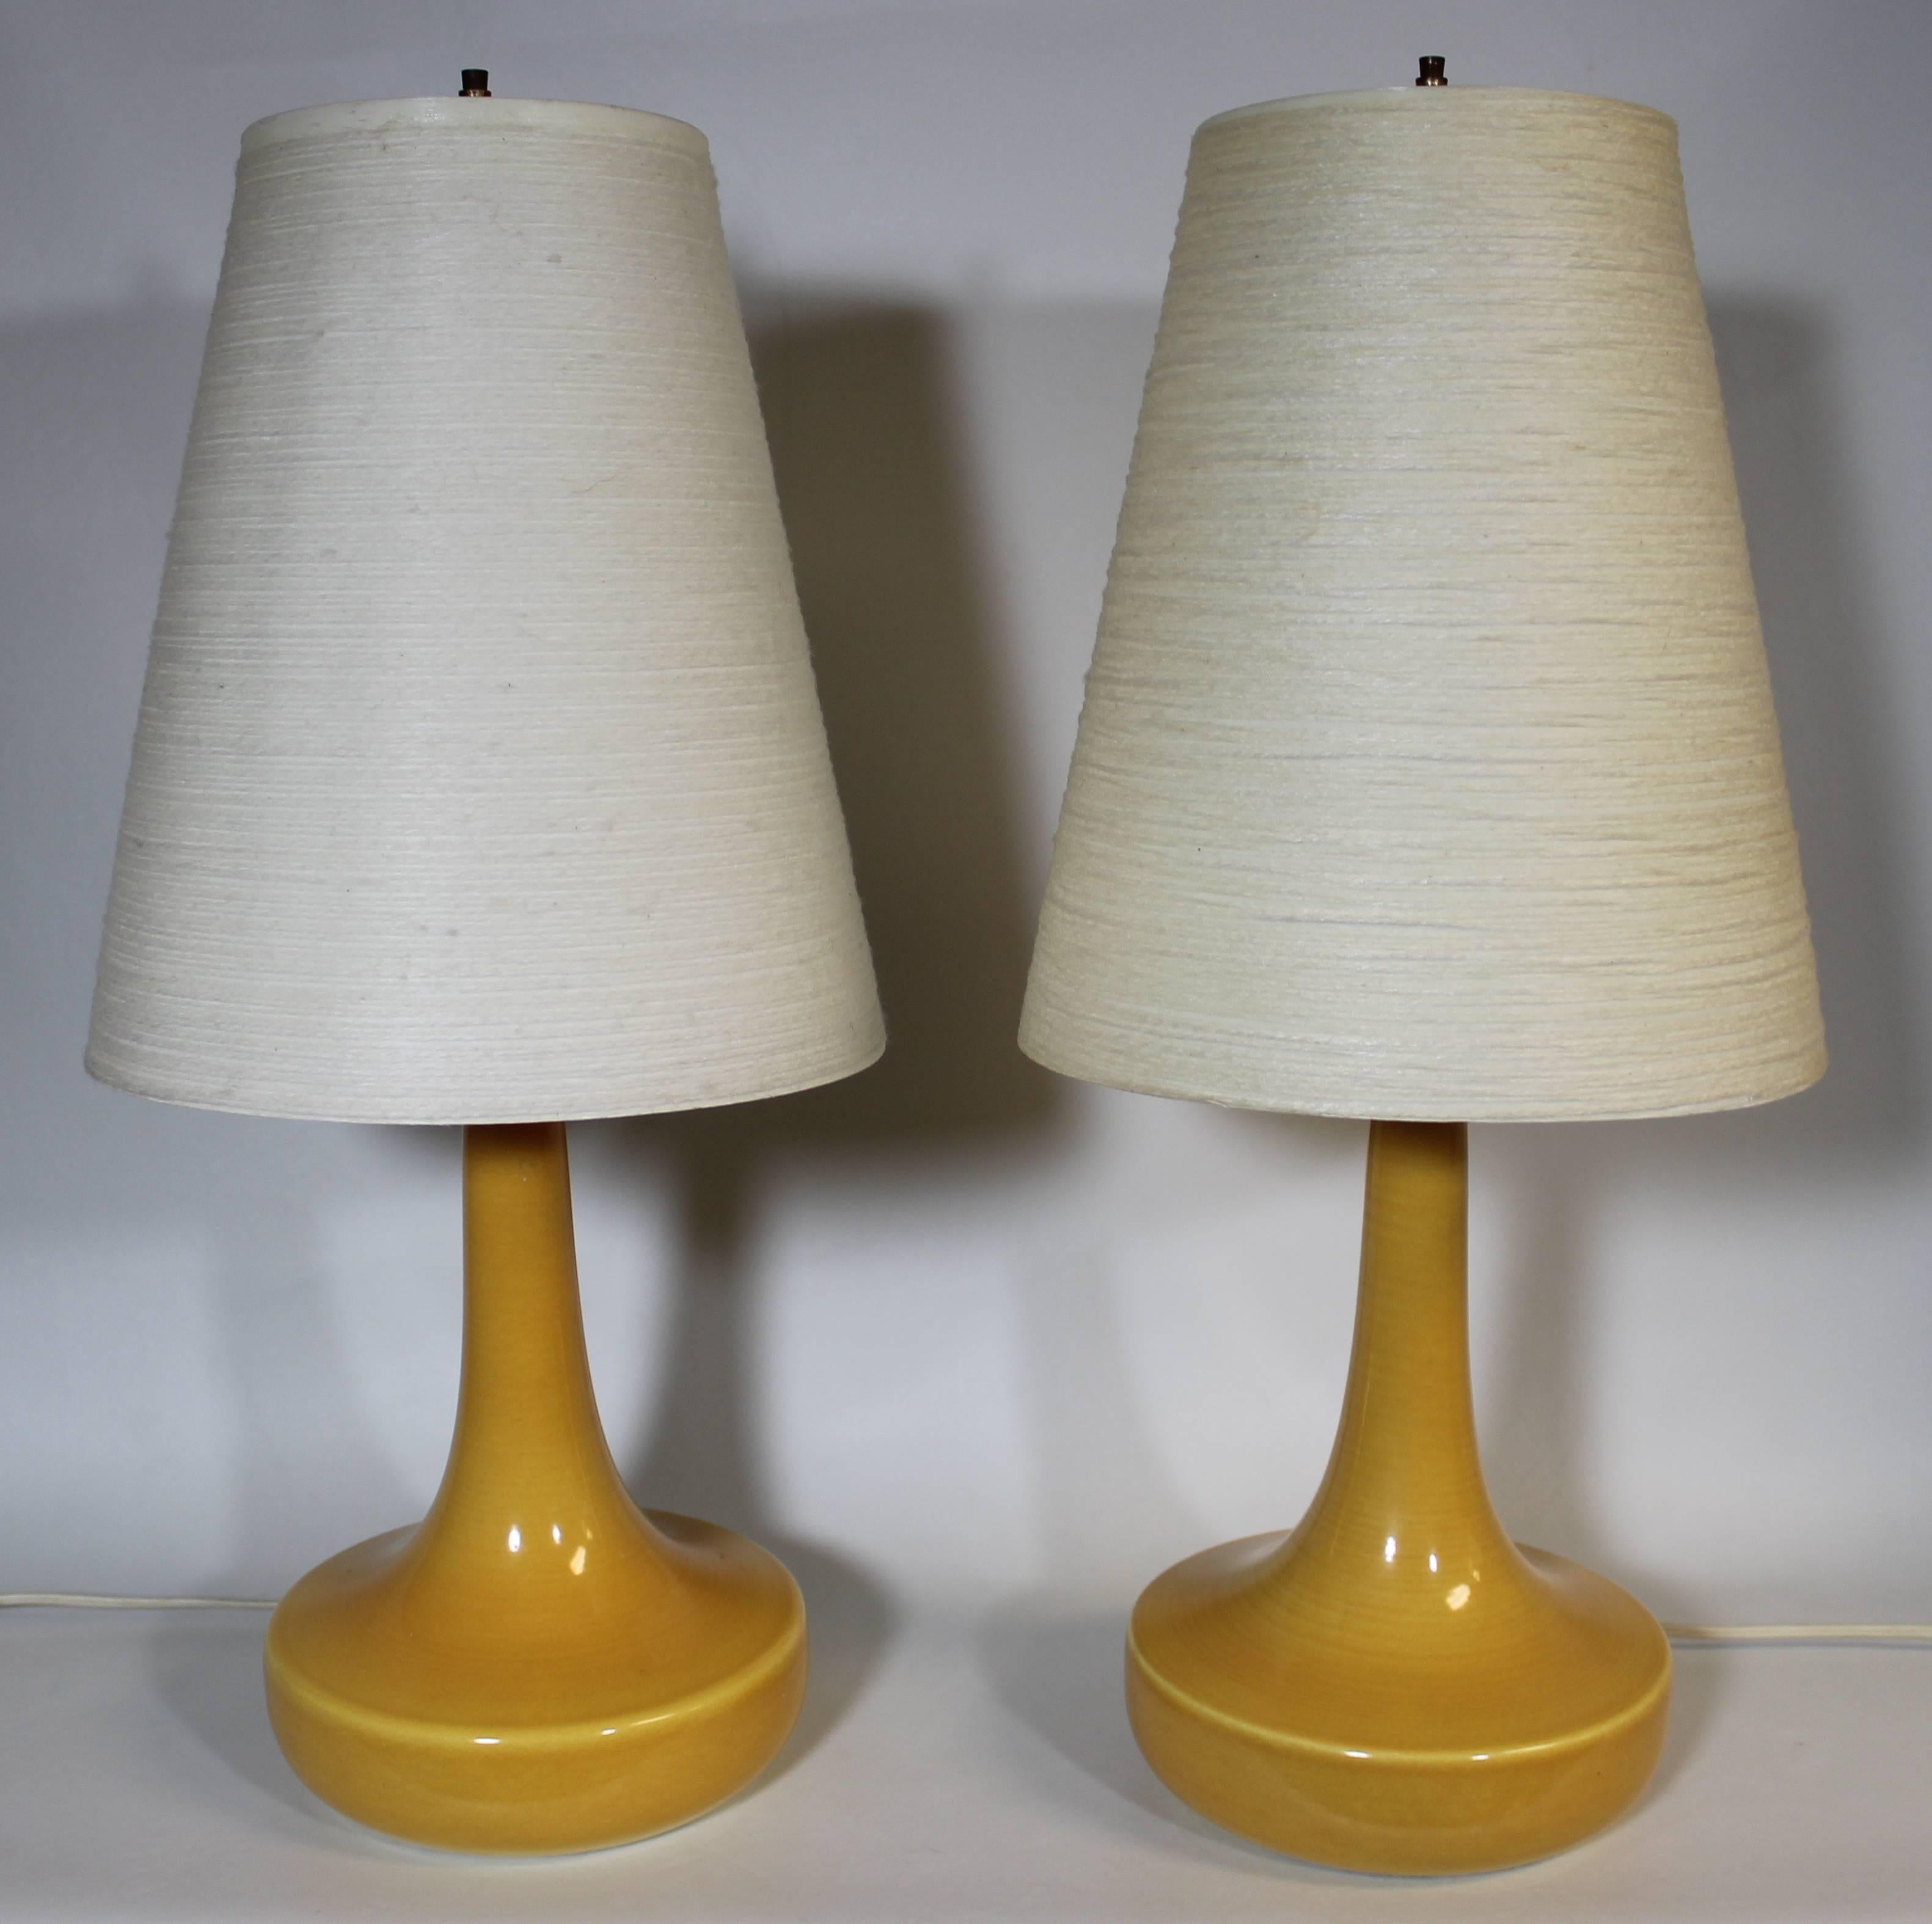 Pair of Lotte Bostlund ceramic lamps, Mid-Century Modern.

The company was founded by Gunnar and Lotte Bostlund, a husband-and-wife team from Denmark who both trained in design, Gunnar as a ceramic engineer and Lotte in fine arts. The couple